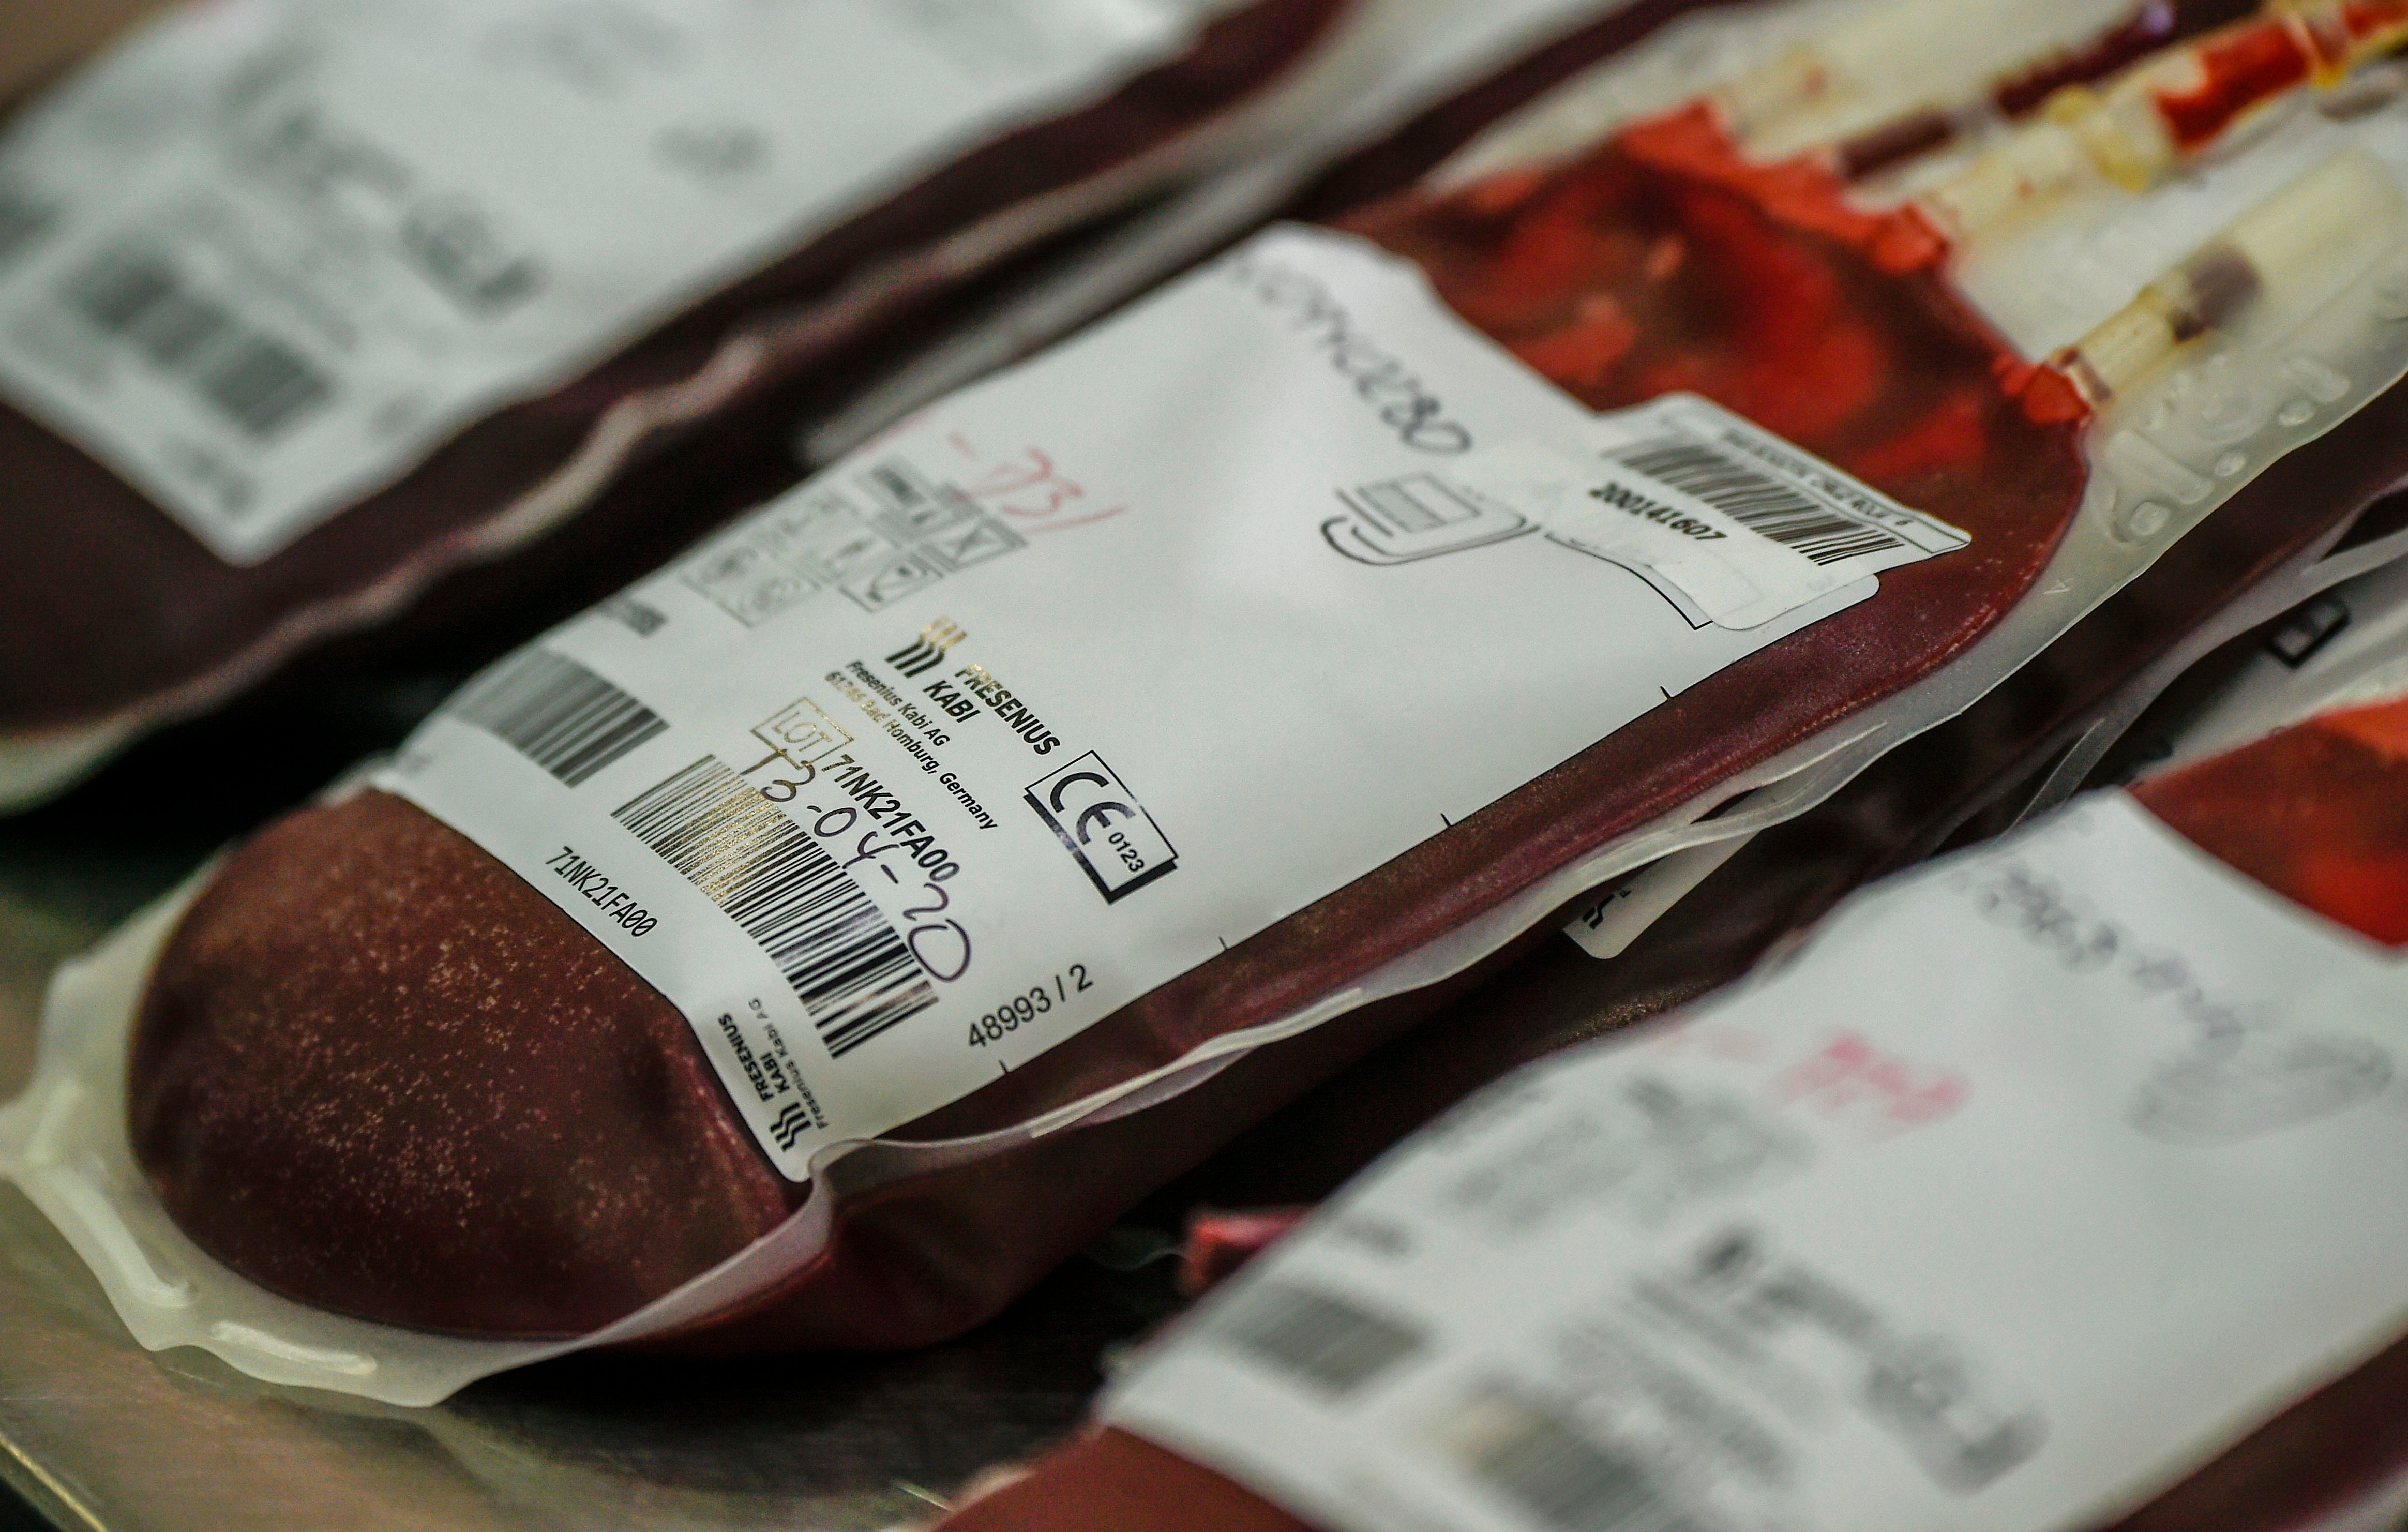 Representational photo: A view of a blood bag